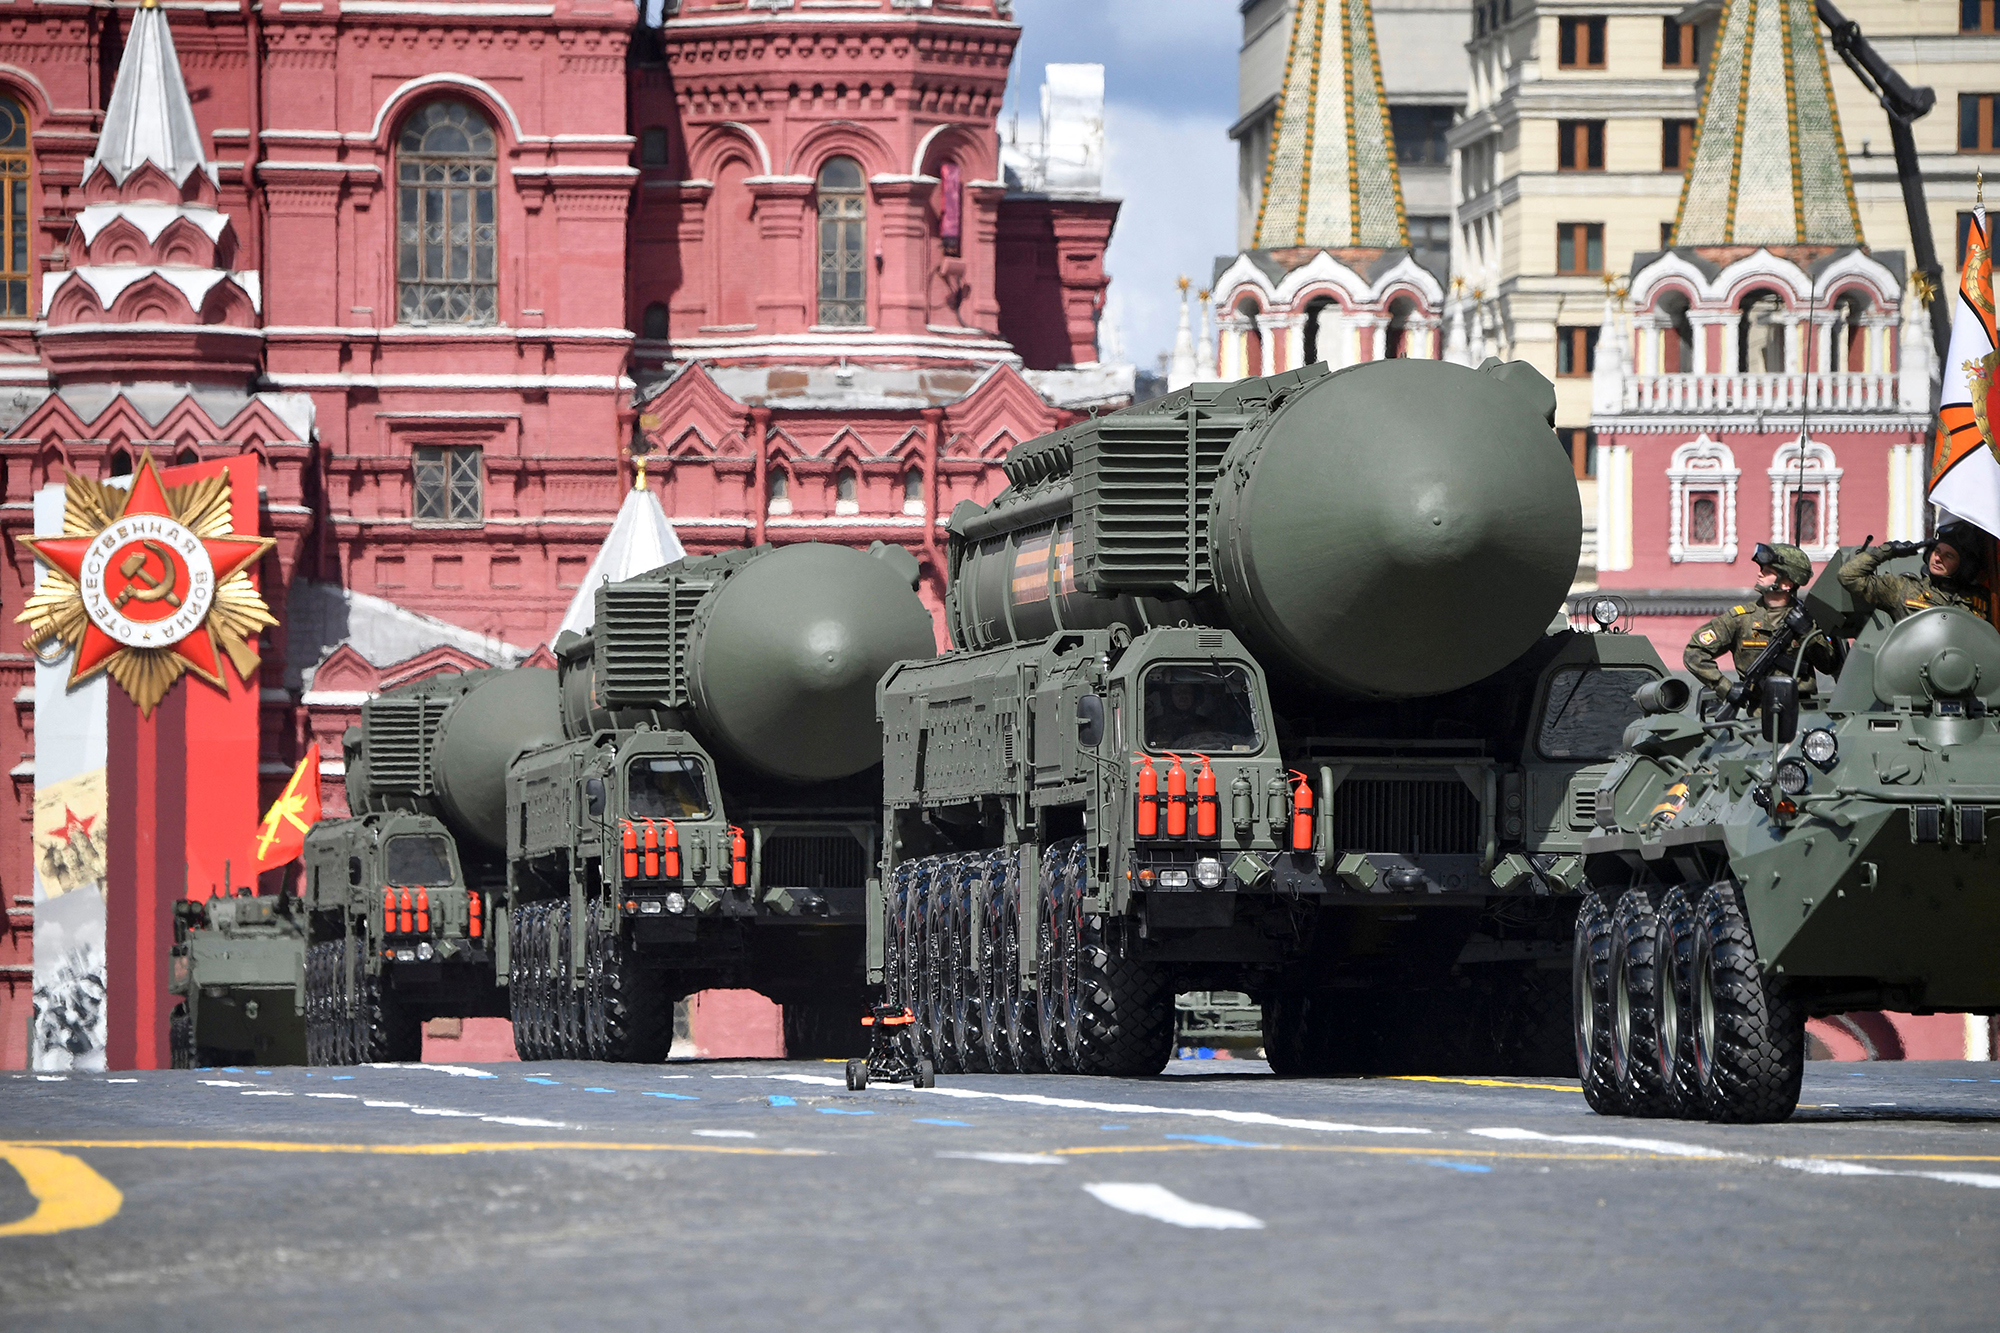 Russian Yars intercontinental ballistic missile launchers parade through Red Square during the Victory Day military parade in central Moscow, Russia, on May 9.